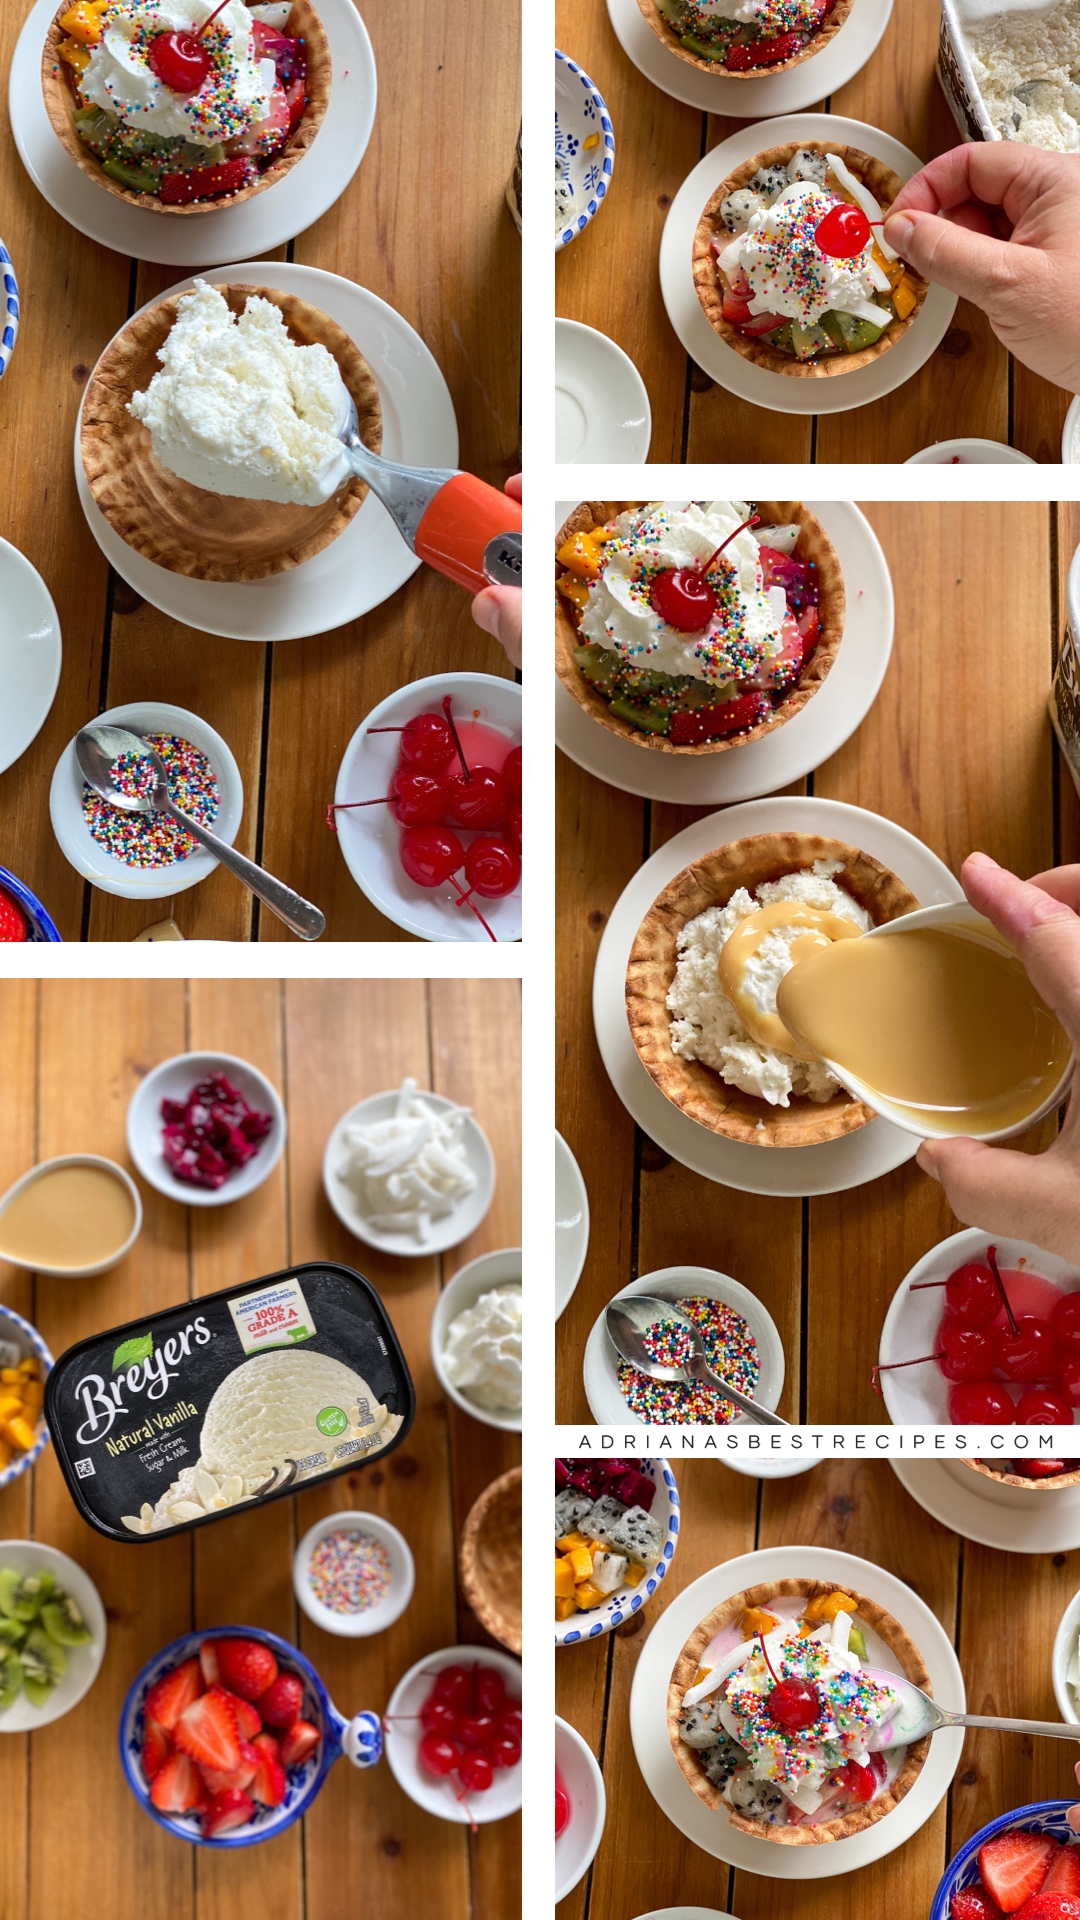 Collage showing how to make the bionico ice cream cup